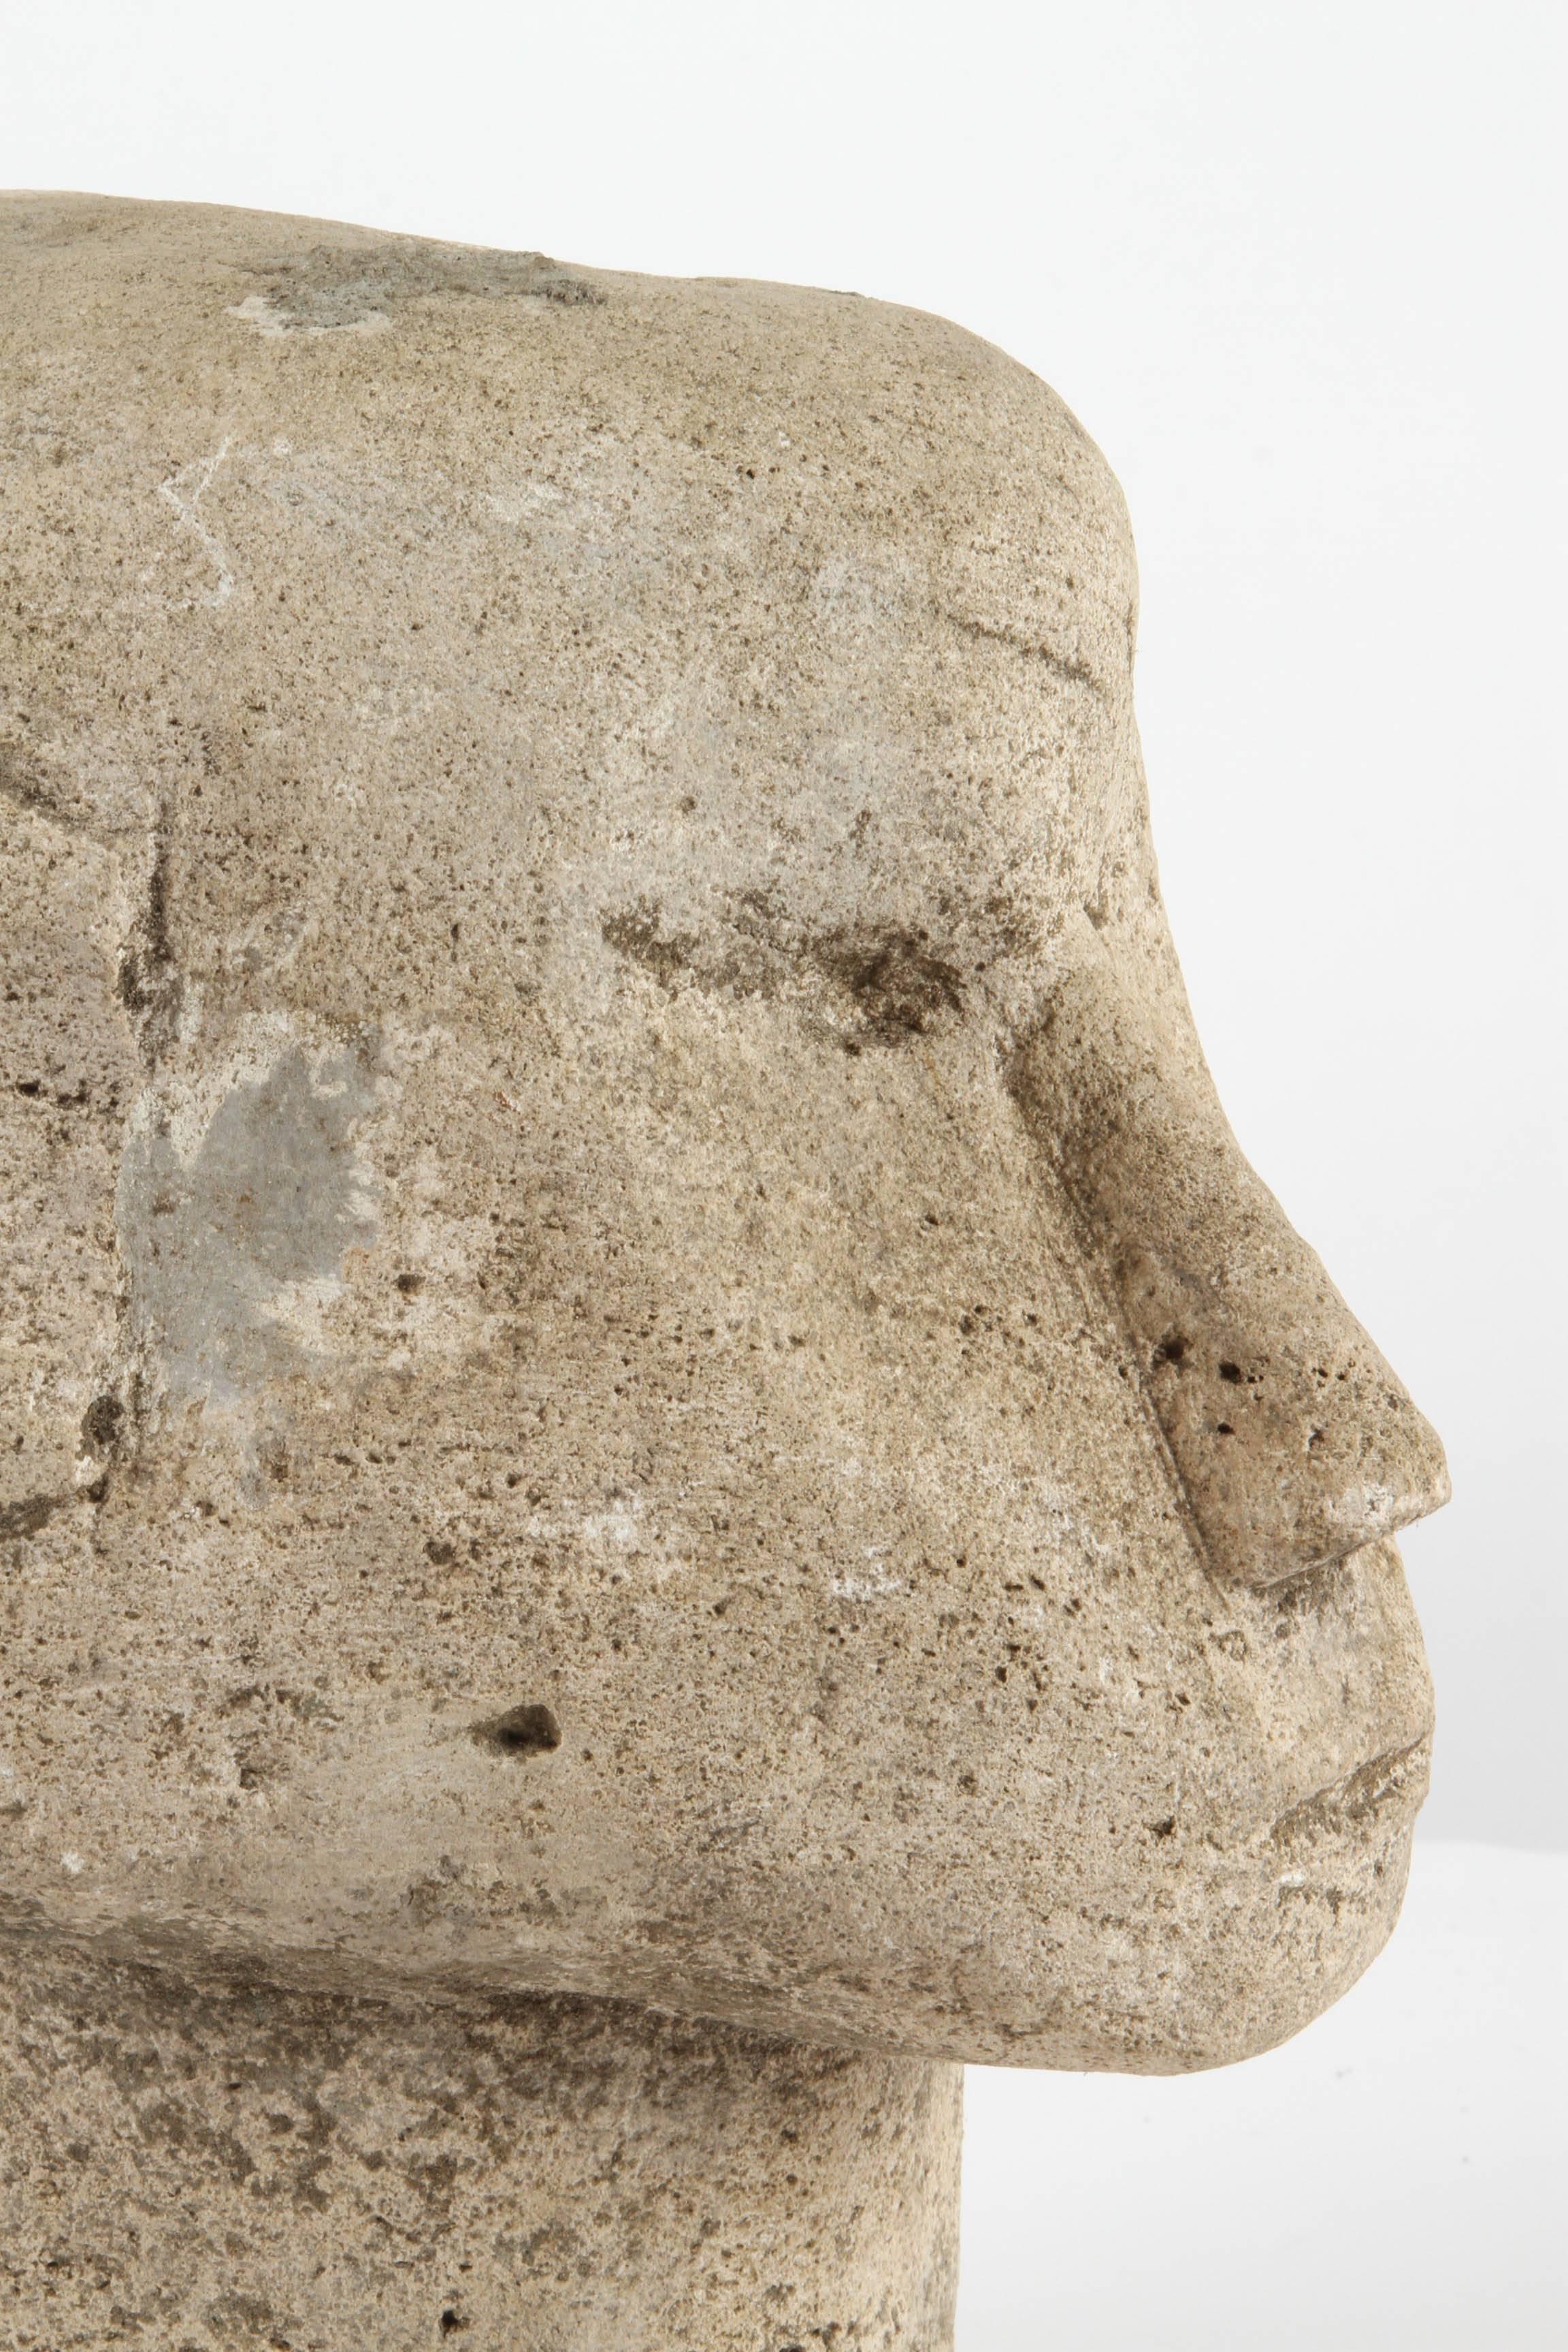 19th Century Carved Stone Head from Timor